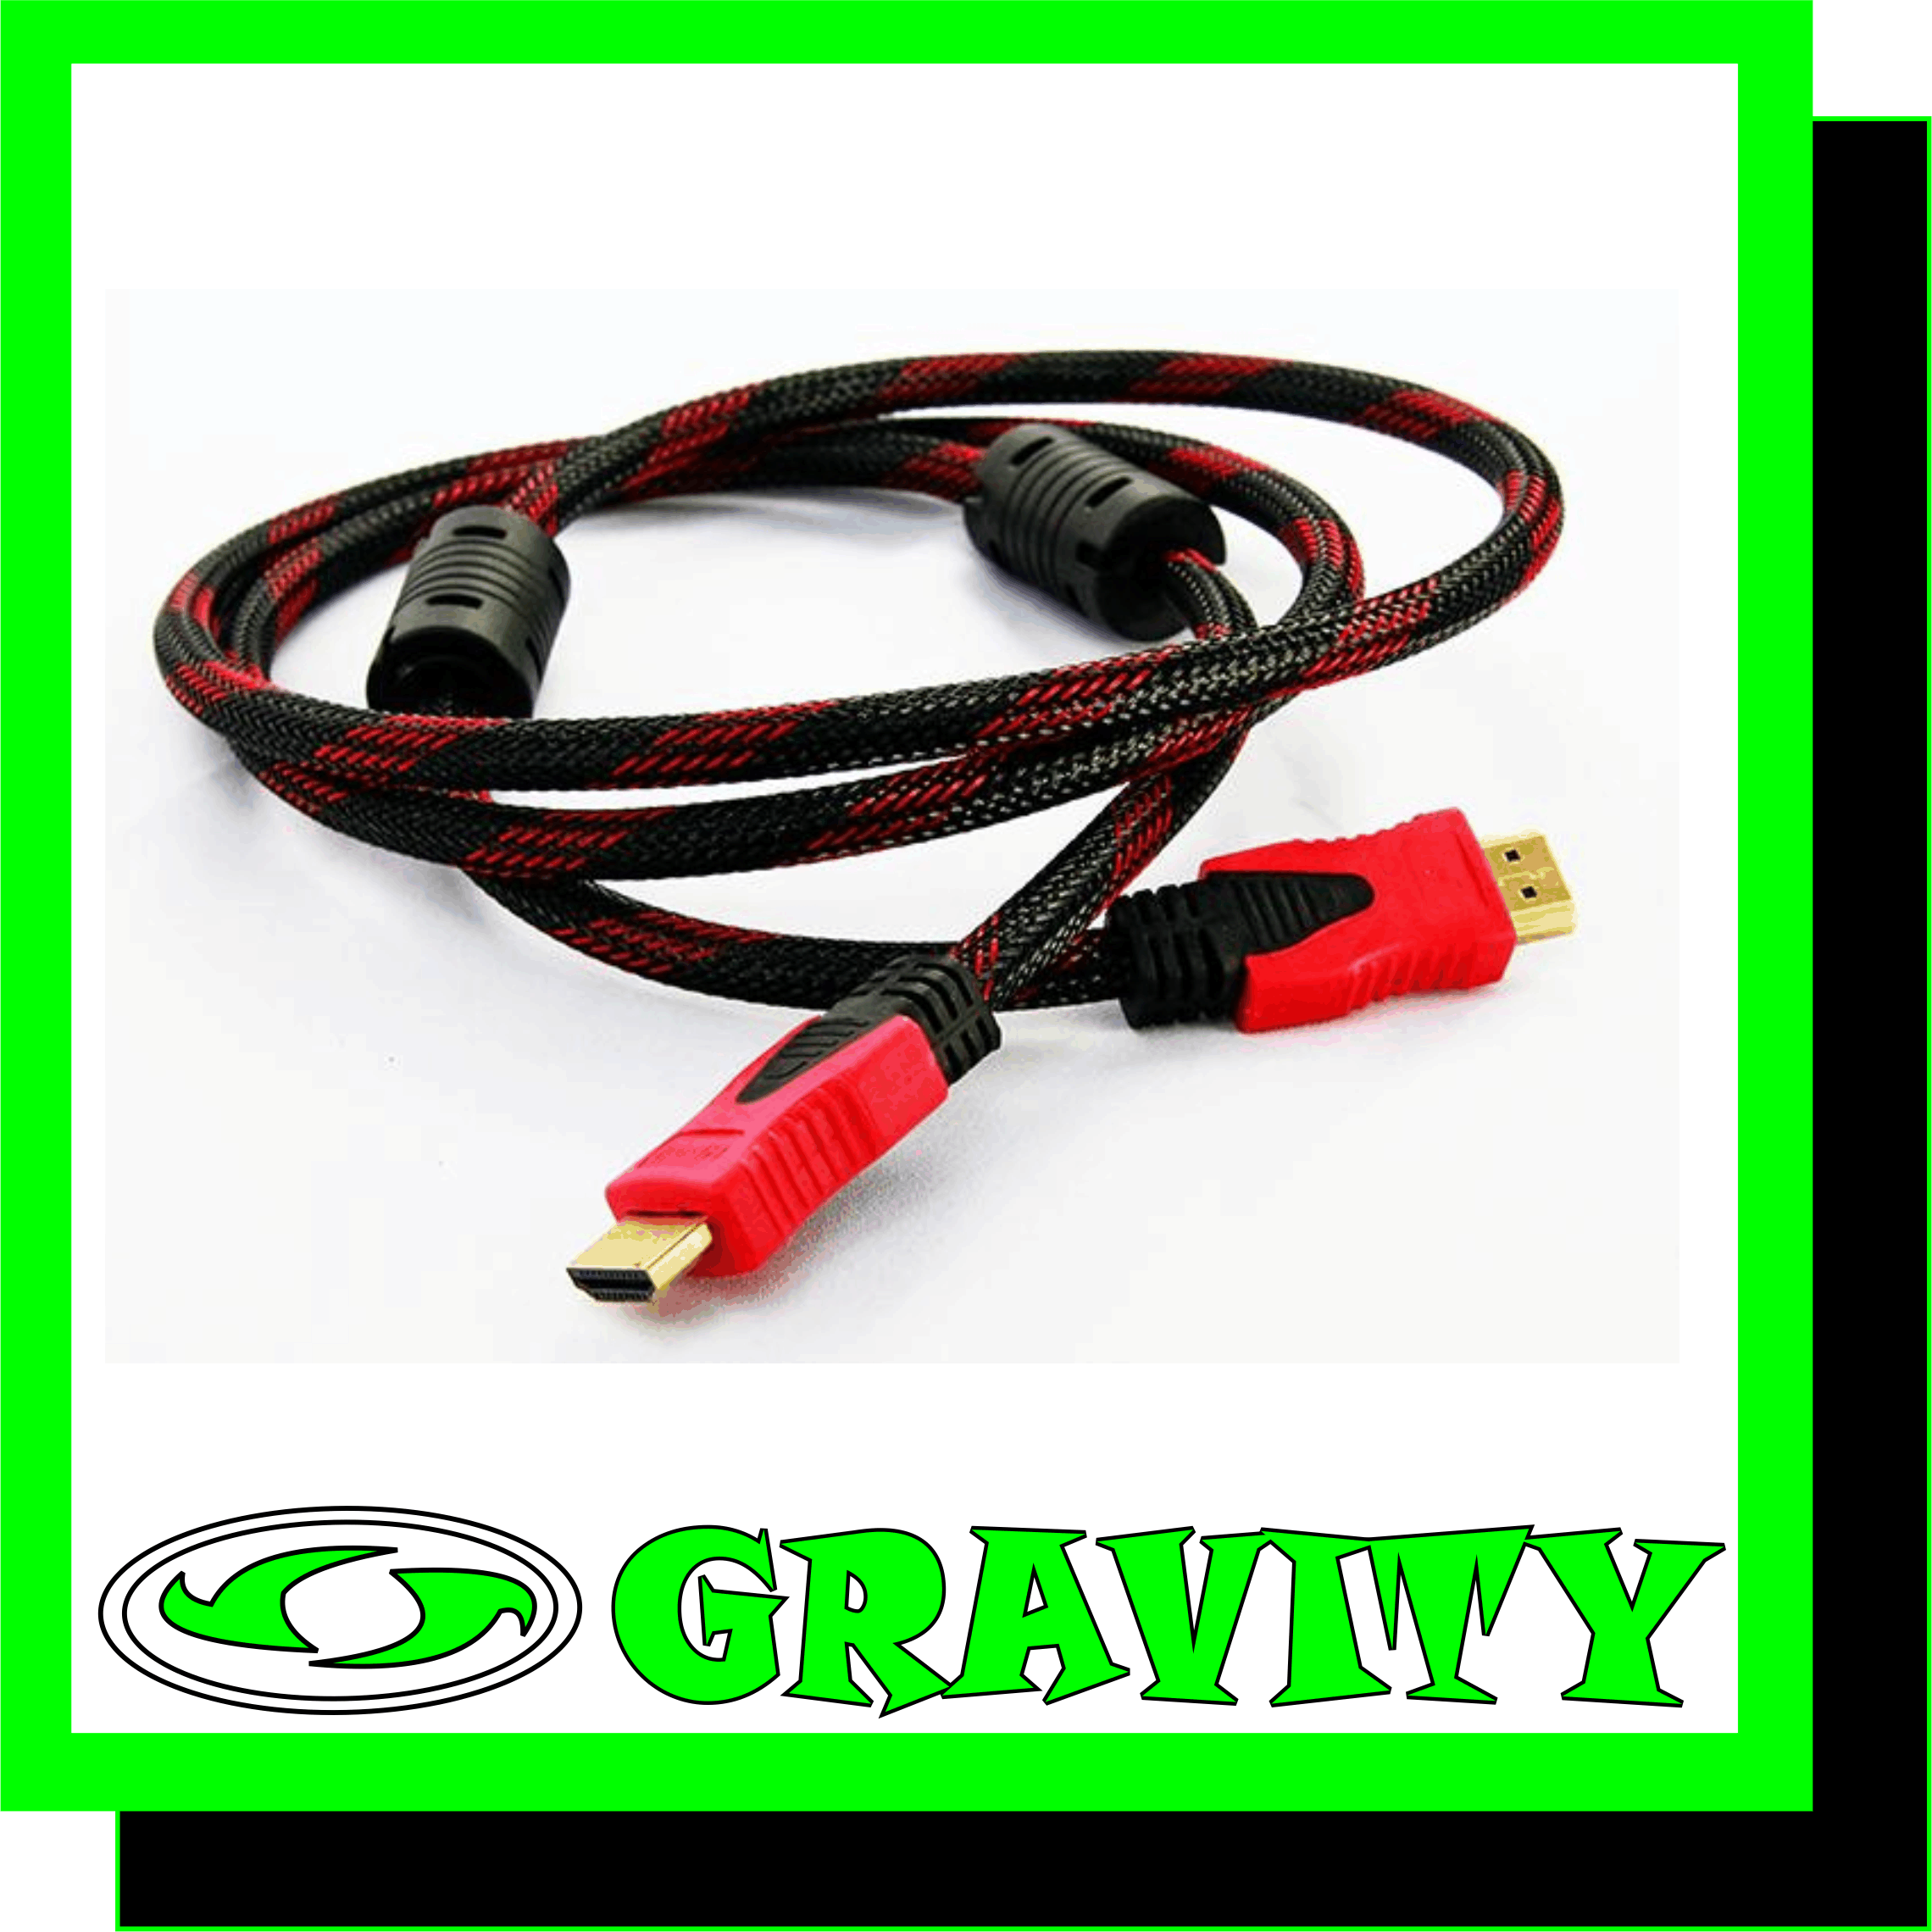 -High Quality 1.5m HDMI Cable (High Speed) -Connections: HDMI to HDMI Resolution can reach to 1080p -Color : Black/Red -Material : Copper + PVC -Compatible Models : FPTV, projector, computer, etc.Note on High Speed HDMI CablesHDMI 1.3 defines two cable -Categories: Category 1-certified (Standard) cables, which have been tested at 74.5 MHz (which would include resolutions such as 720p60 and 1080i60), and Category 2--certified (High Speed) cables, which have been tested at 340 MHz (which would include resolutions such as 1080p60 and 2160p30).High Speed HDMI 1.3 cables can support all -HDMI 1.4 features except for the HDMI Ethernet Channel in the 1.4 Version.